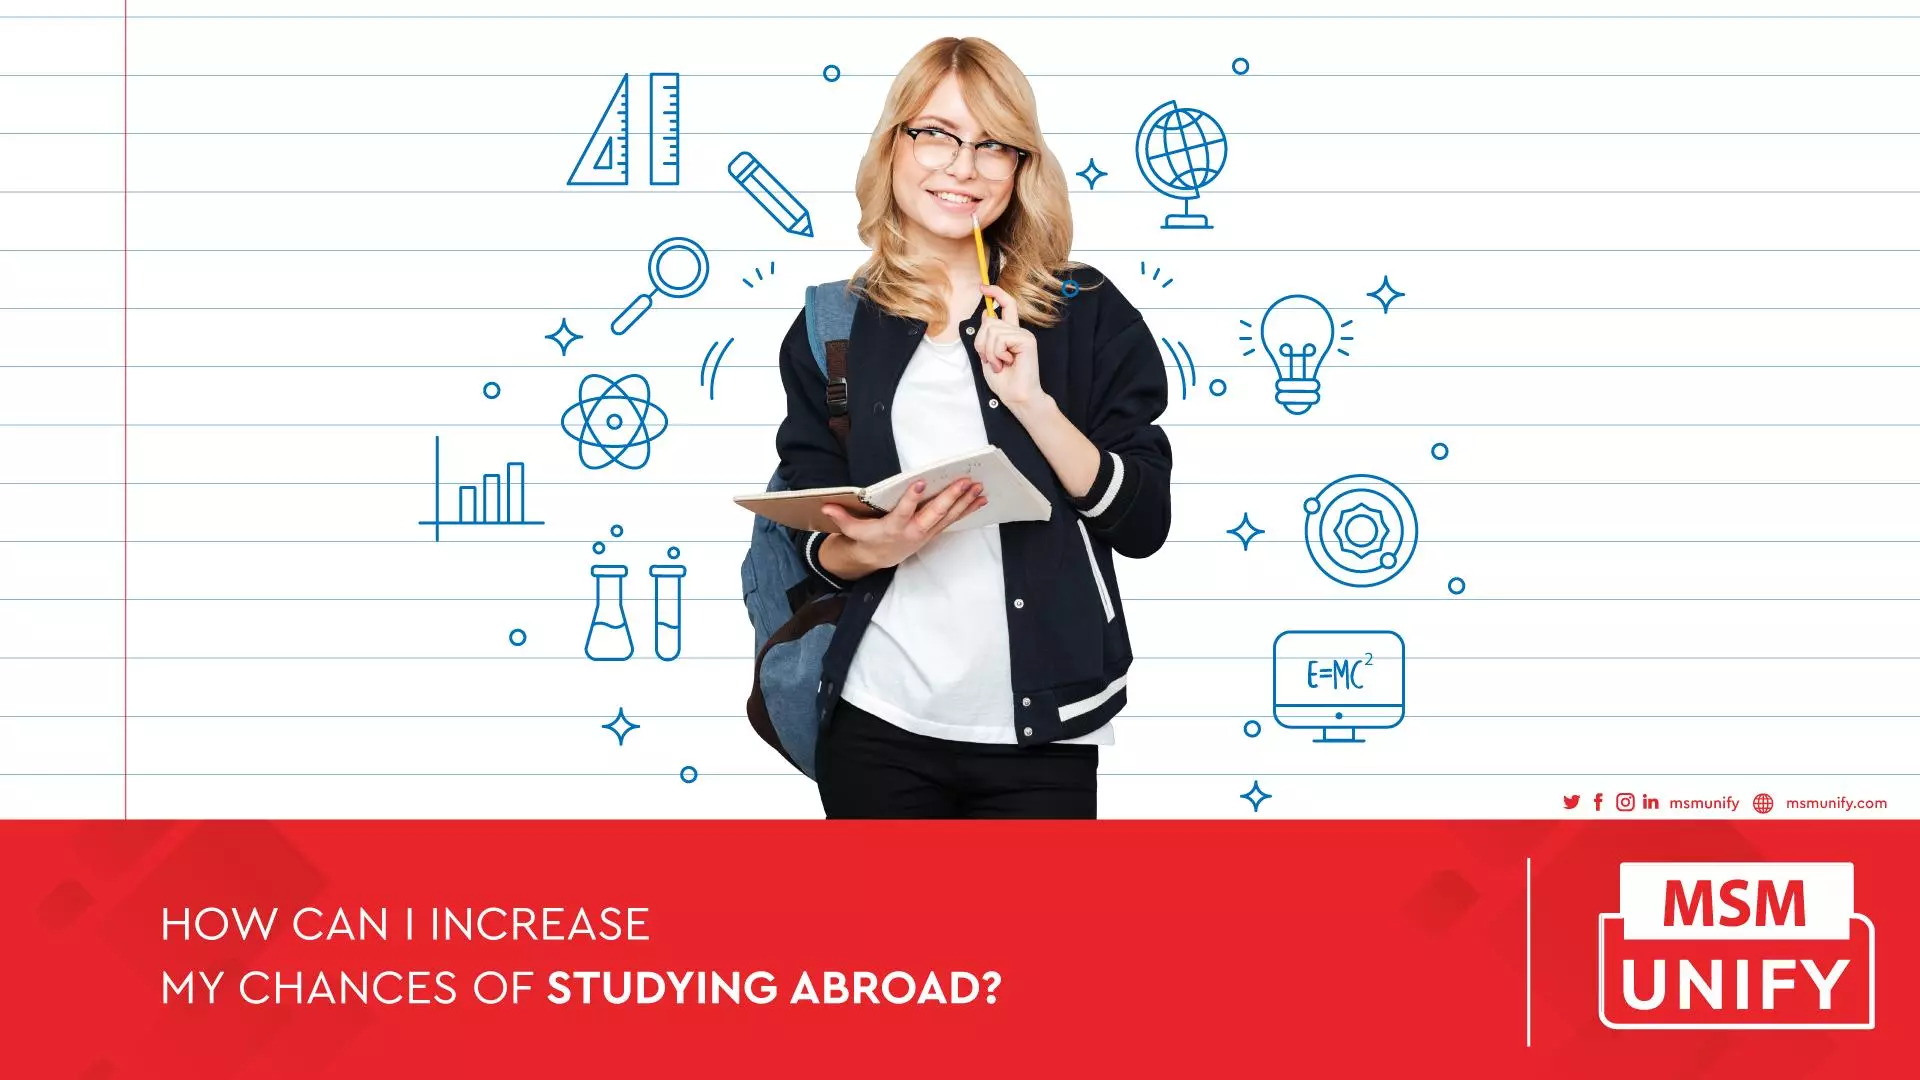 How can I increase my chances of studying abroad